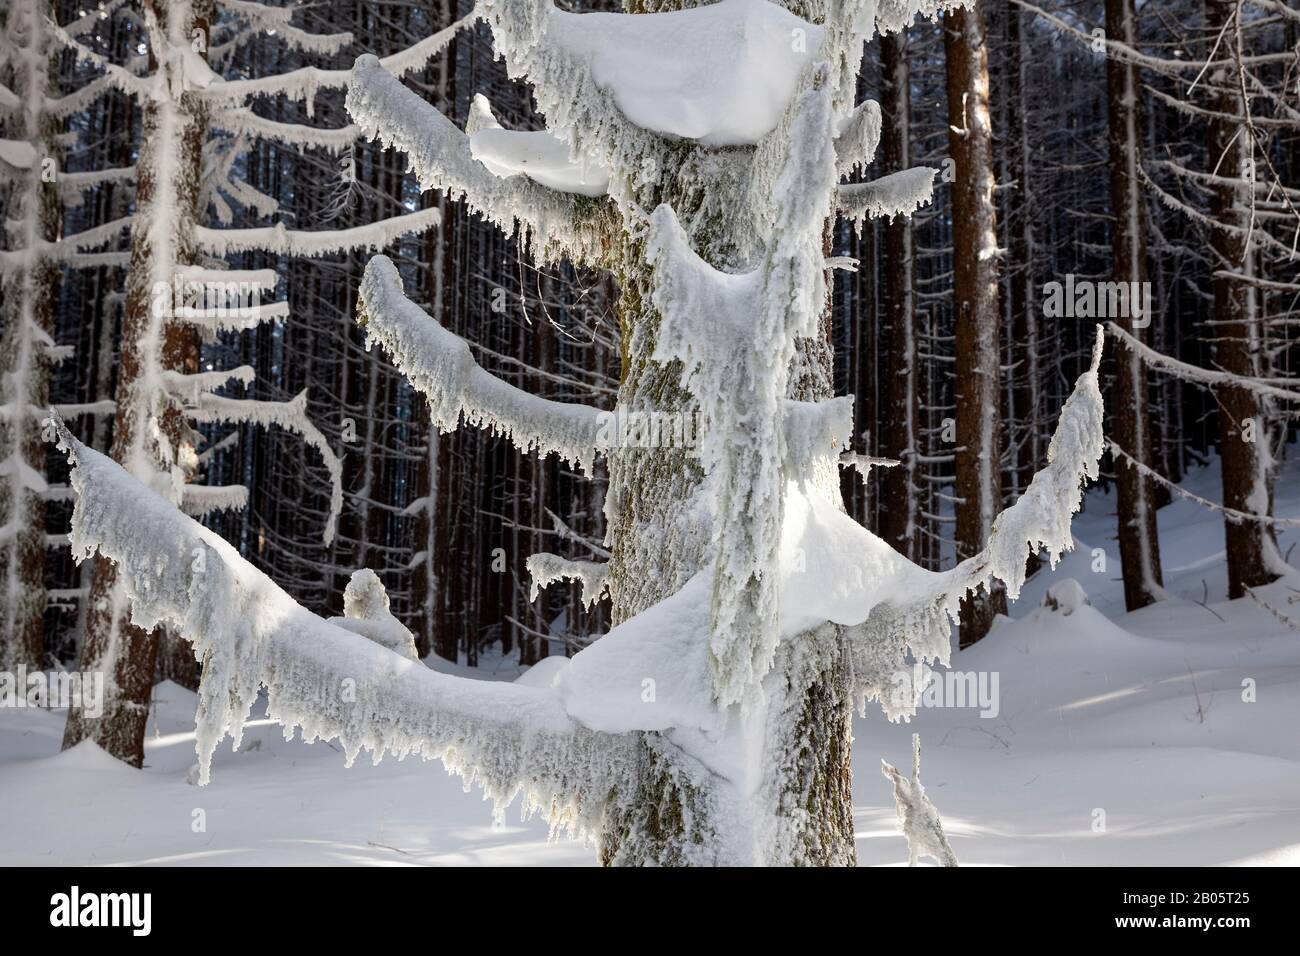 WA17173-00...WASHINGTON - Snow covered trees in the Issaquah Alps. Stock Photo